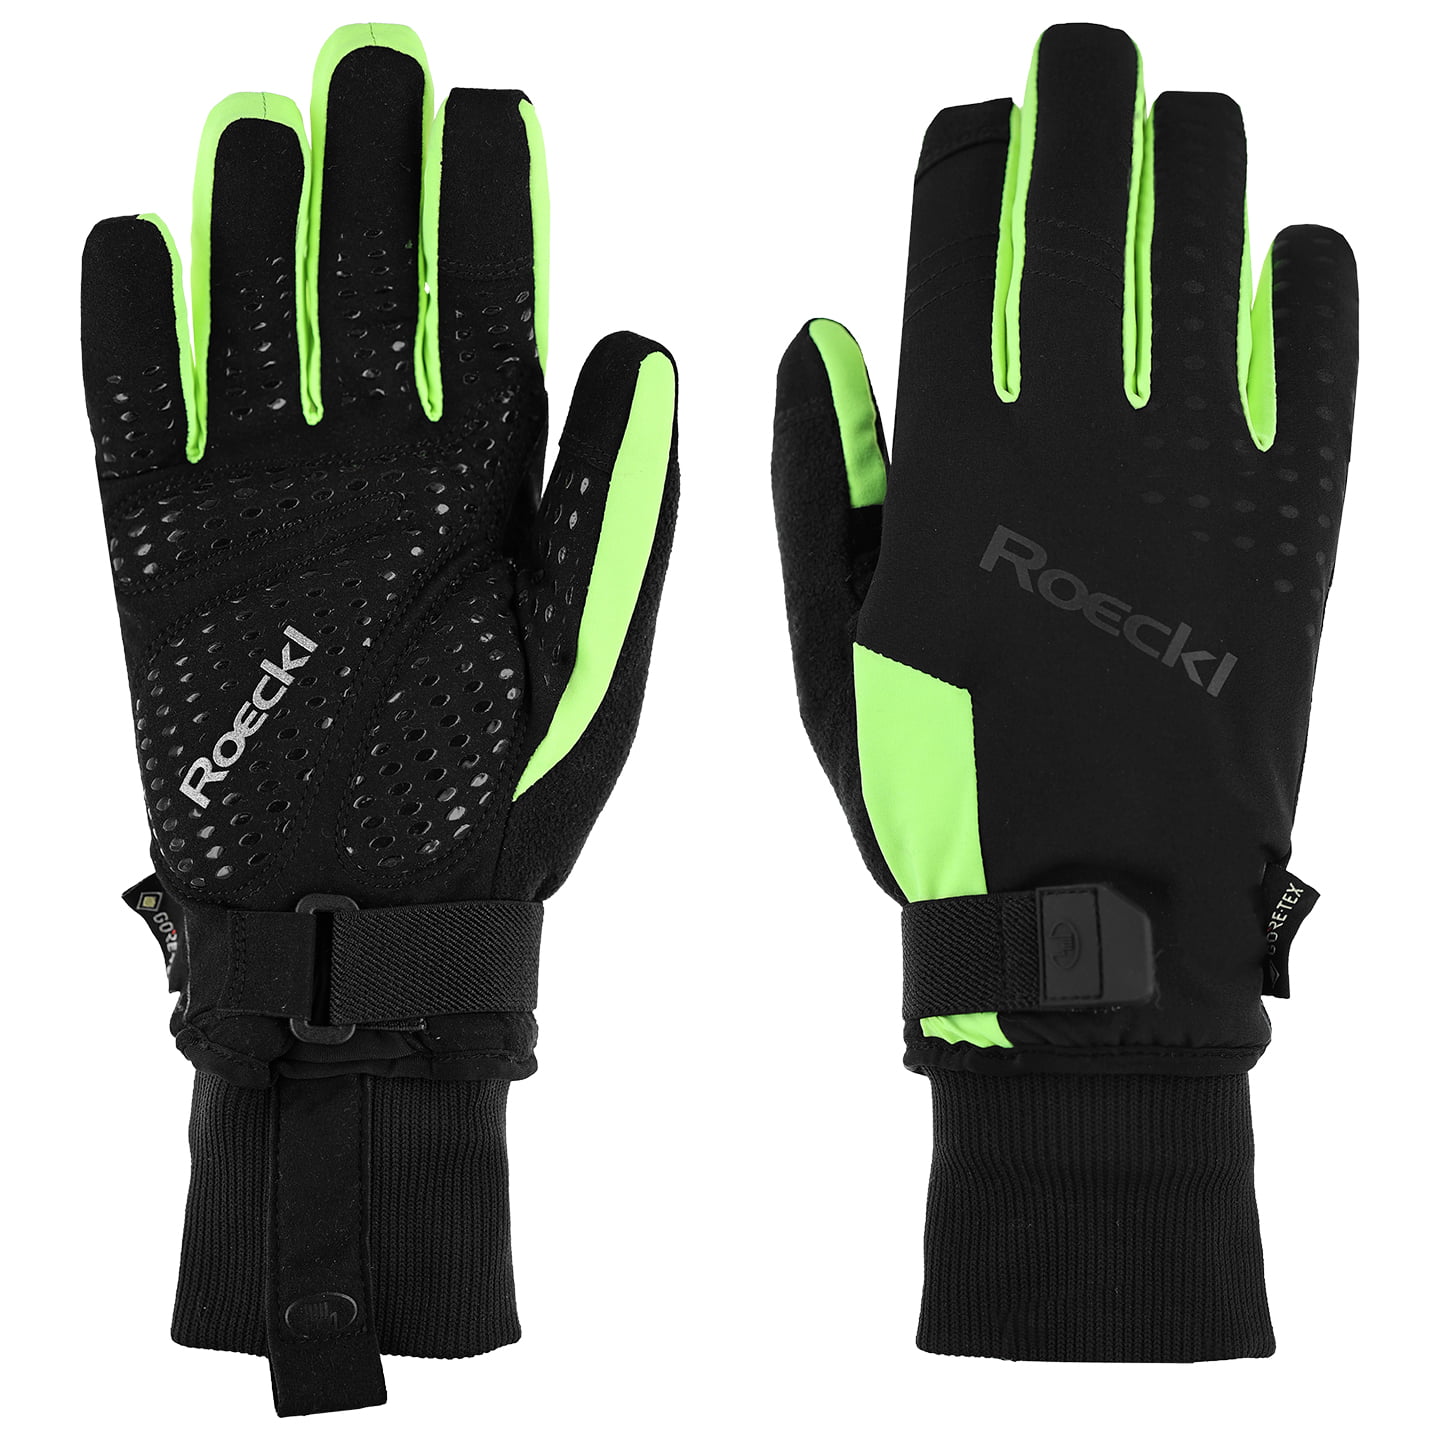 ROECKL Winter Gloves Rocca 2 GTX Winter Cycling Gloves, for men, size 6,5, MTB gloves, Bike clothes